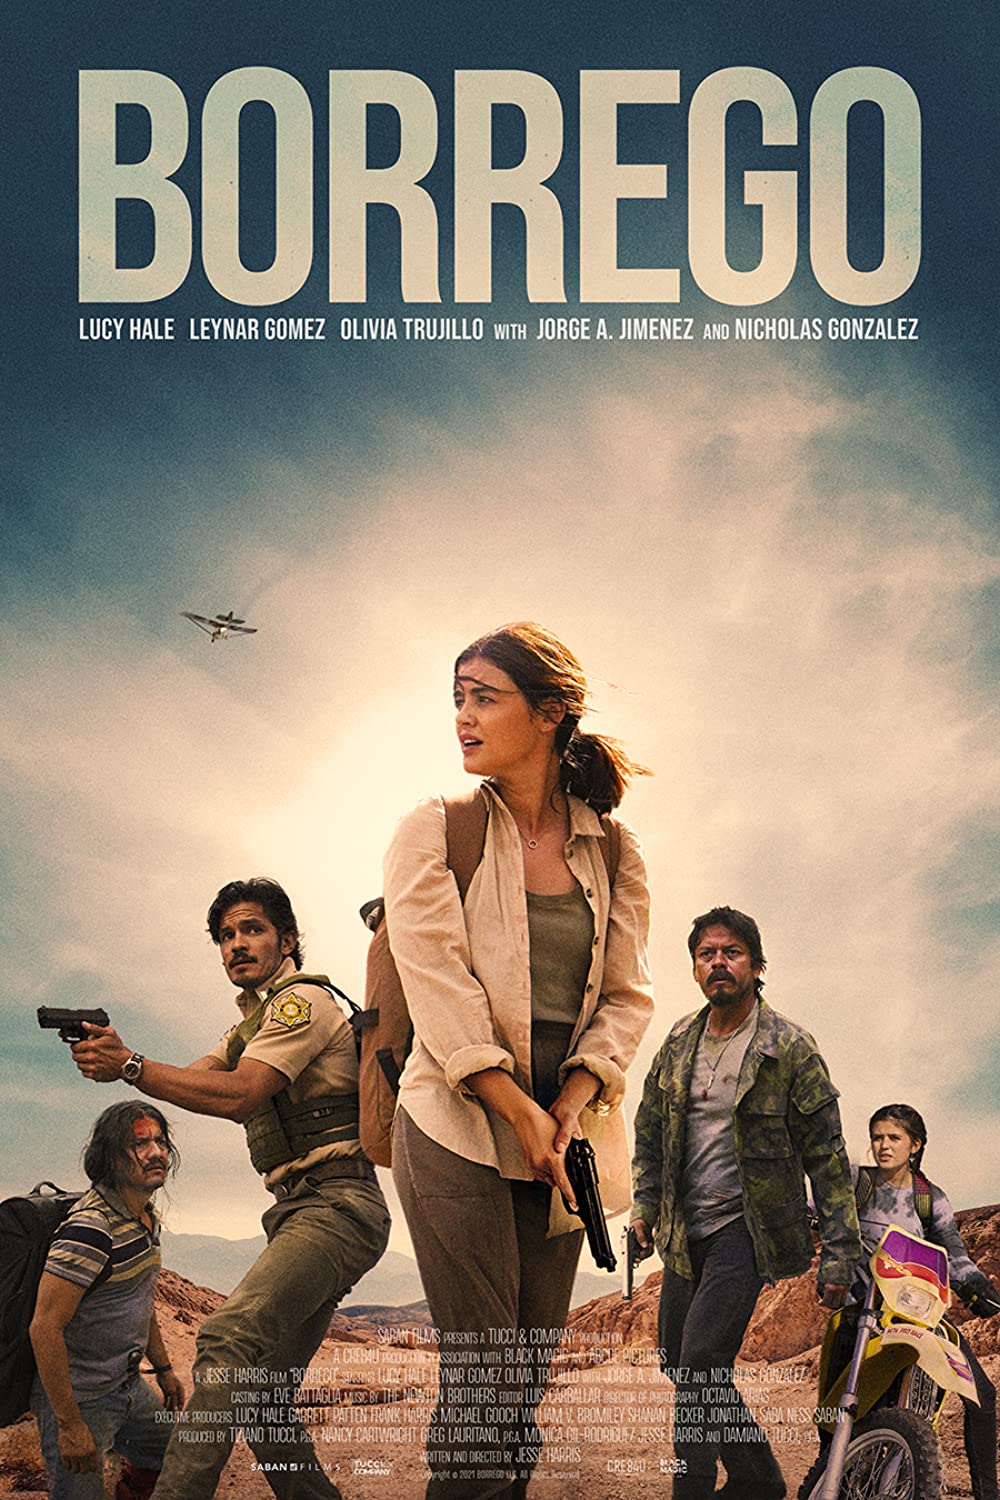 Borrego Lucy Hale Poster 1